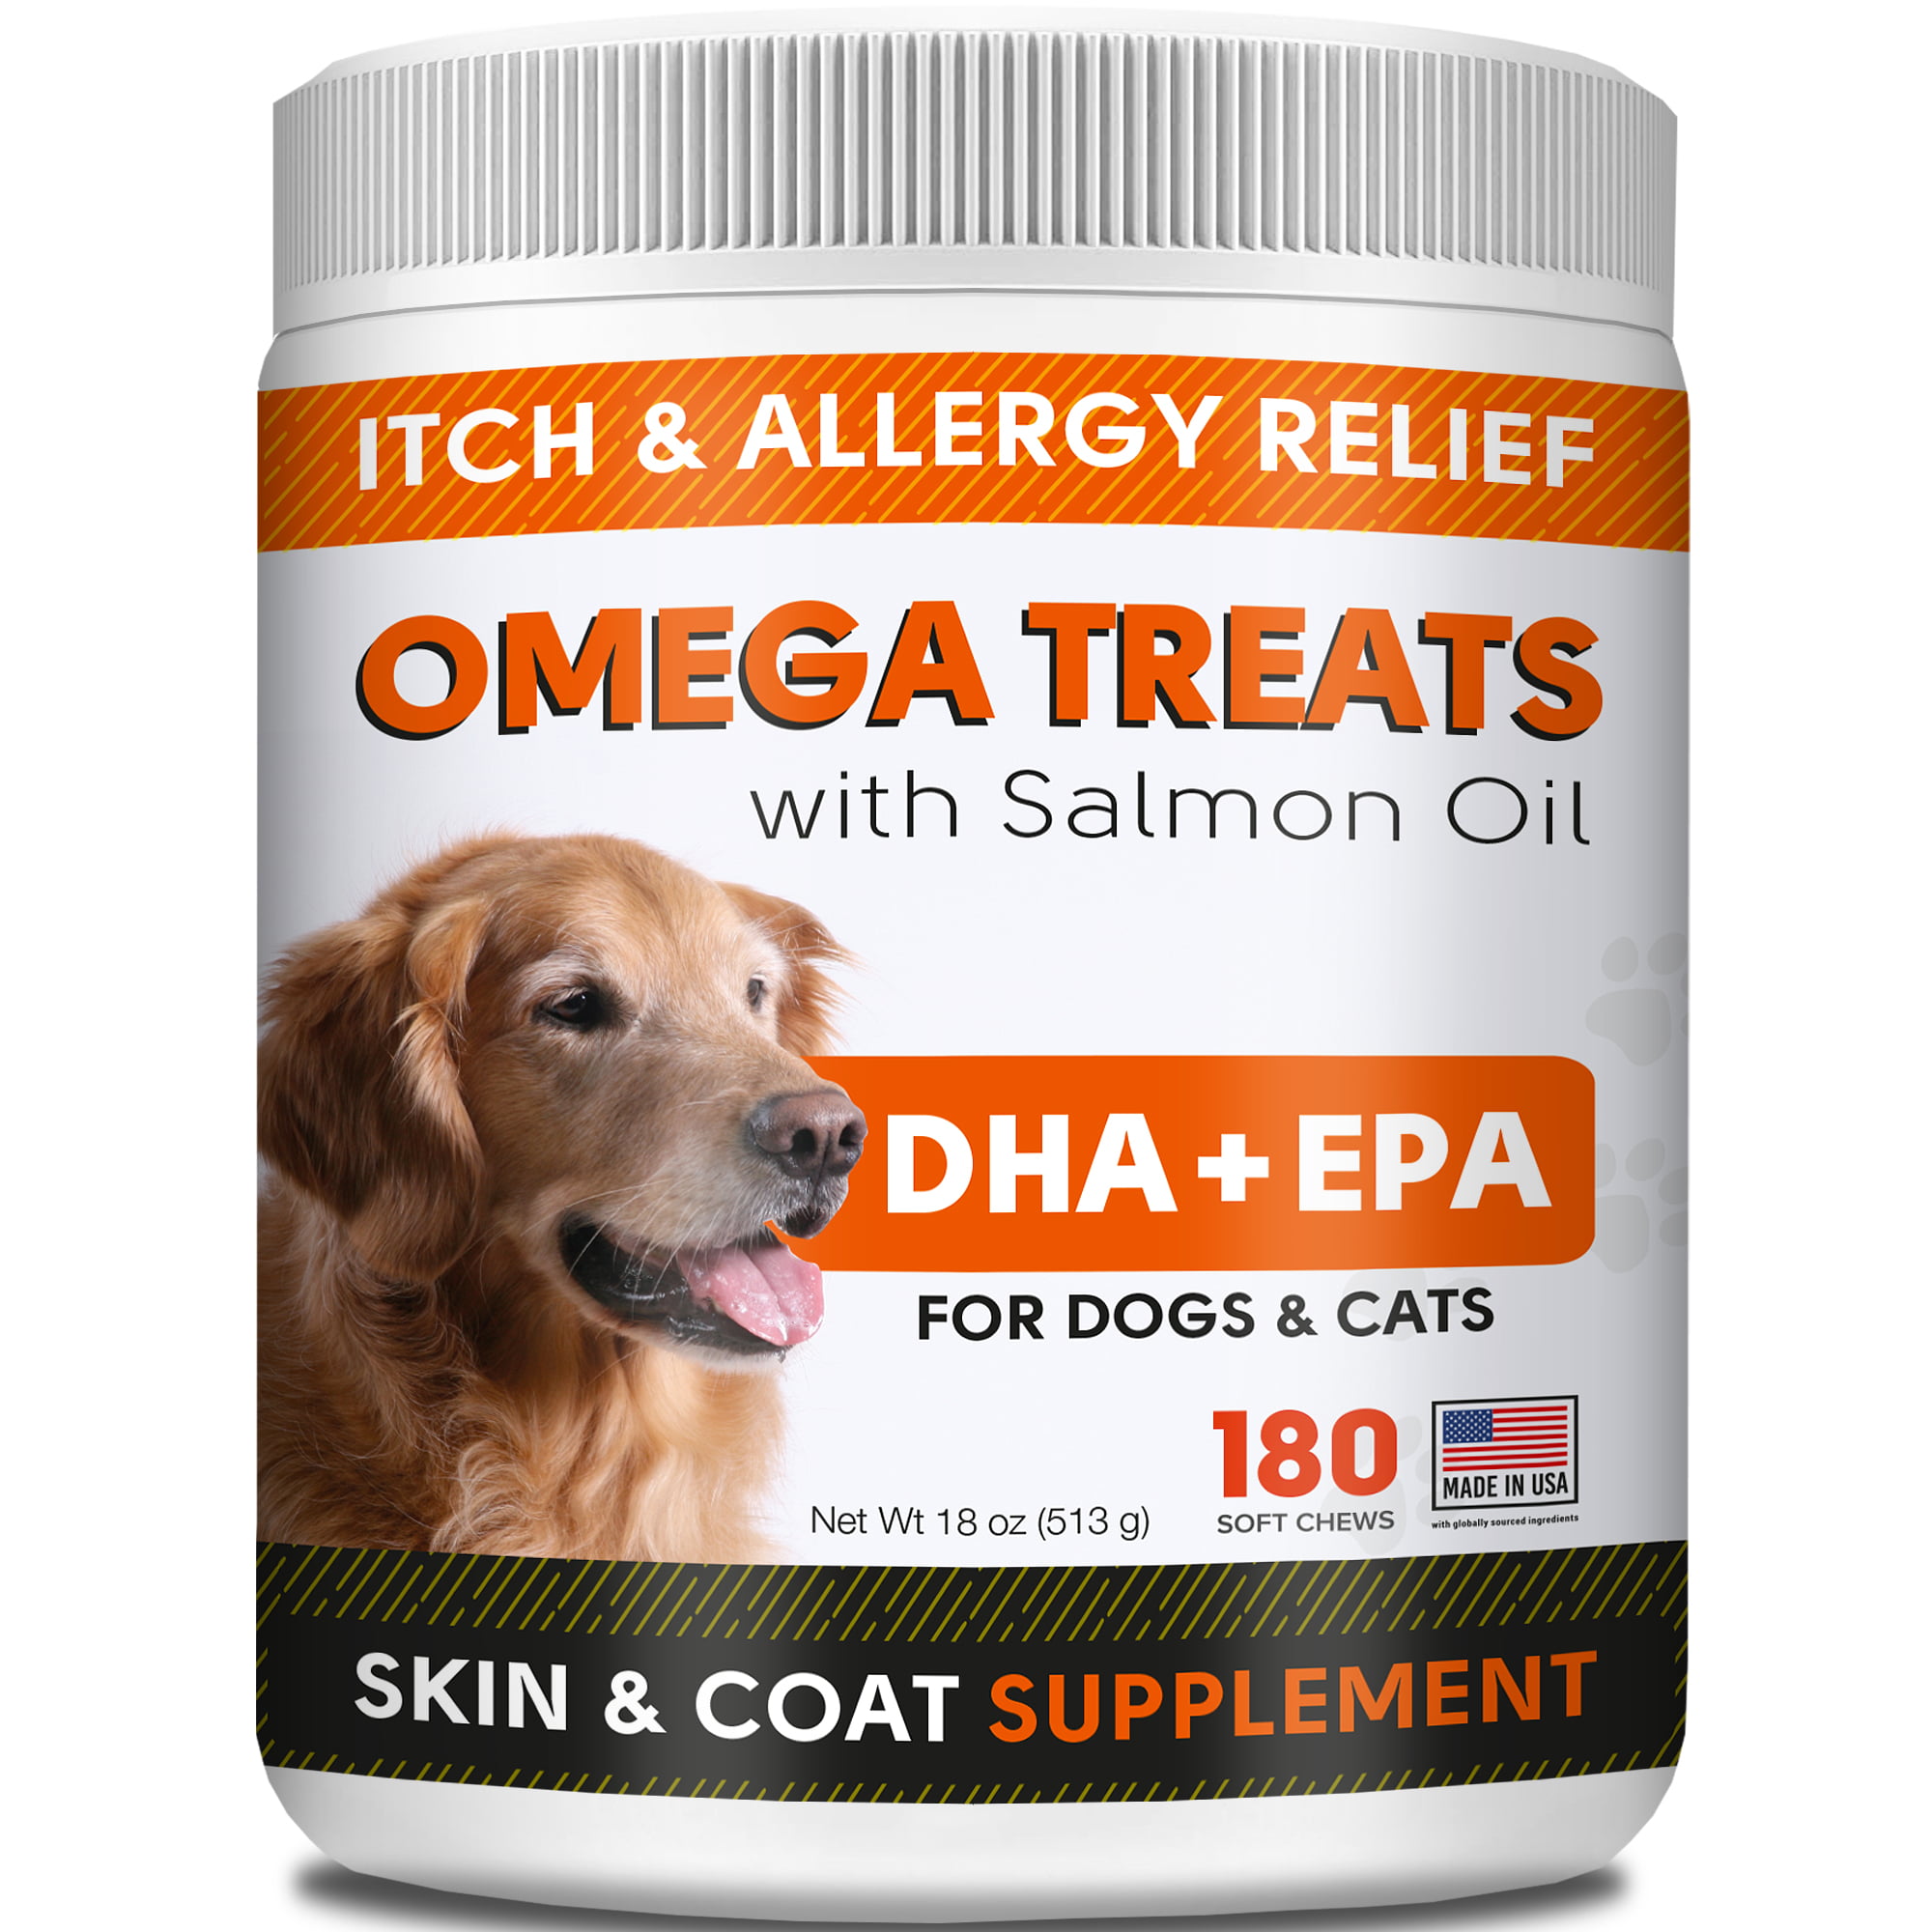 Fish Oil Omega 3 Treats for Dogs Allergy and Itch Relief